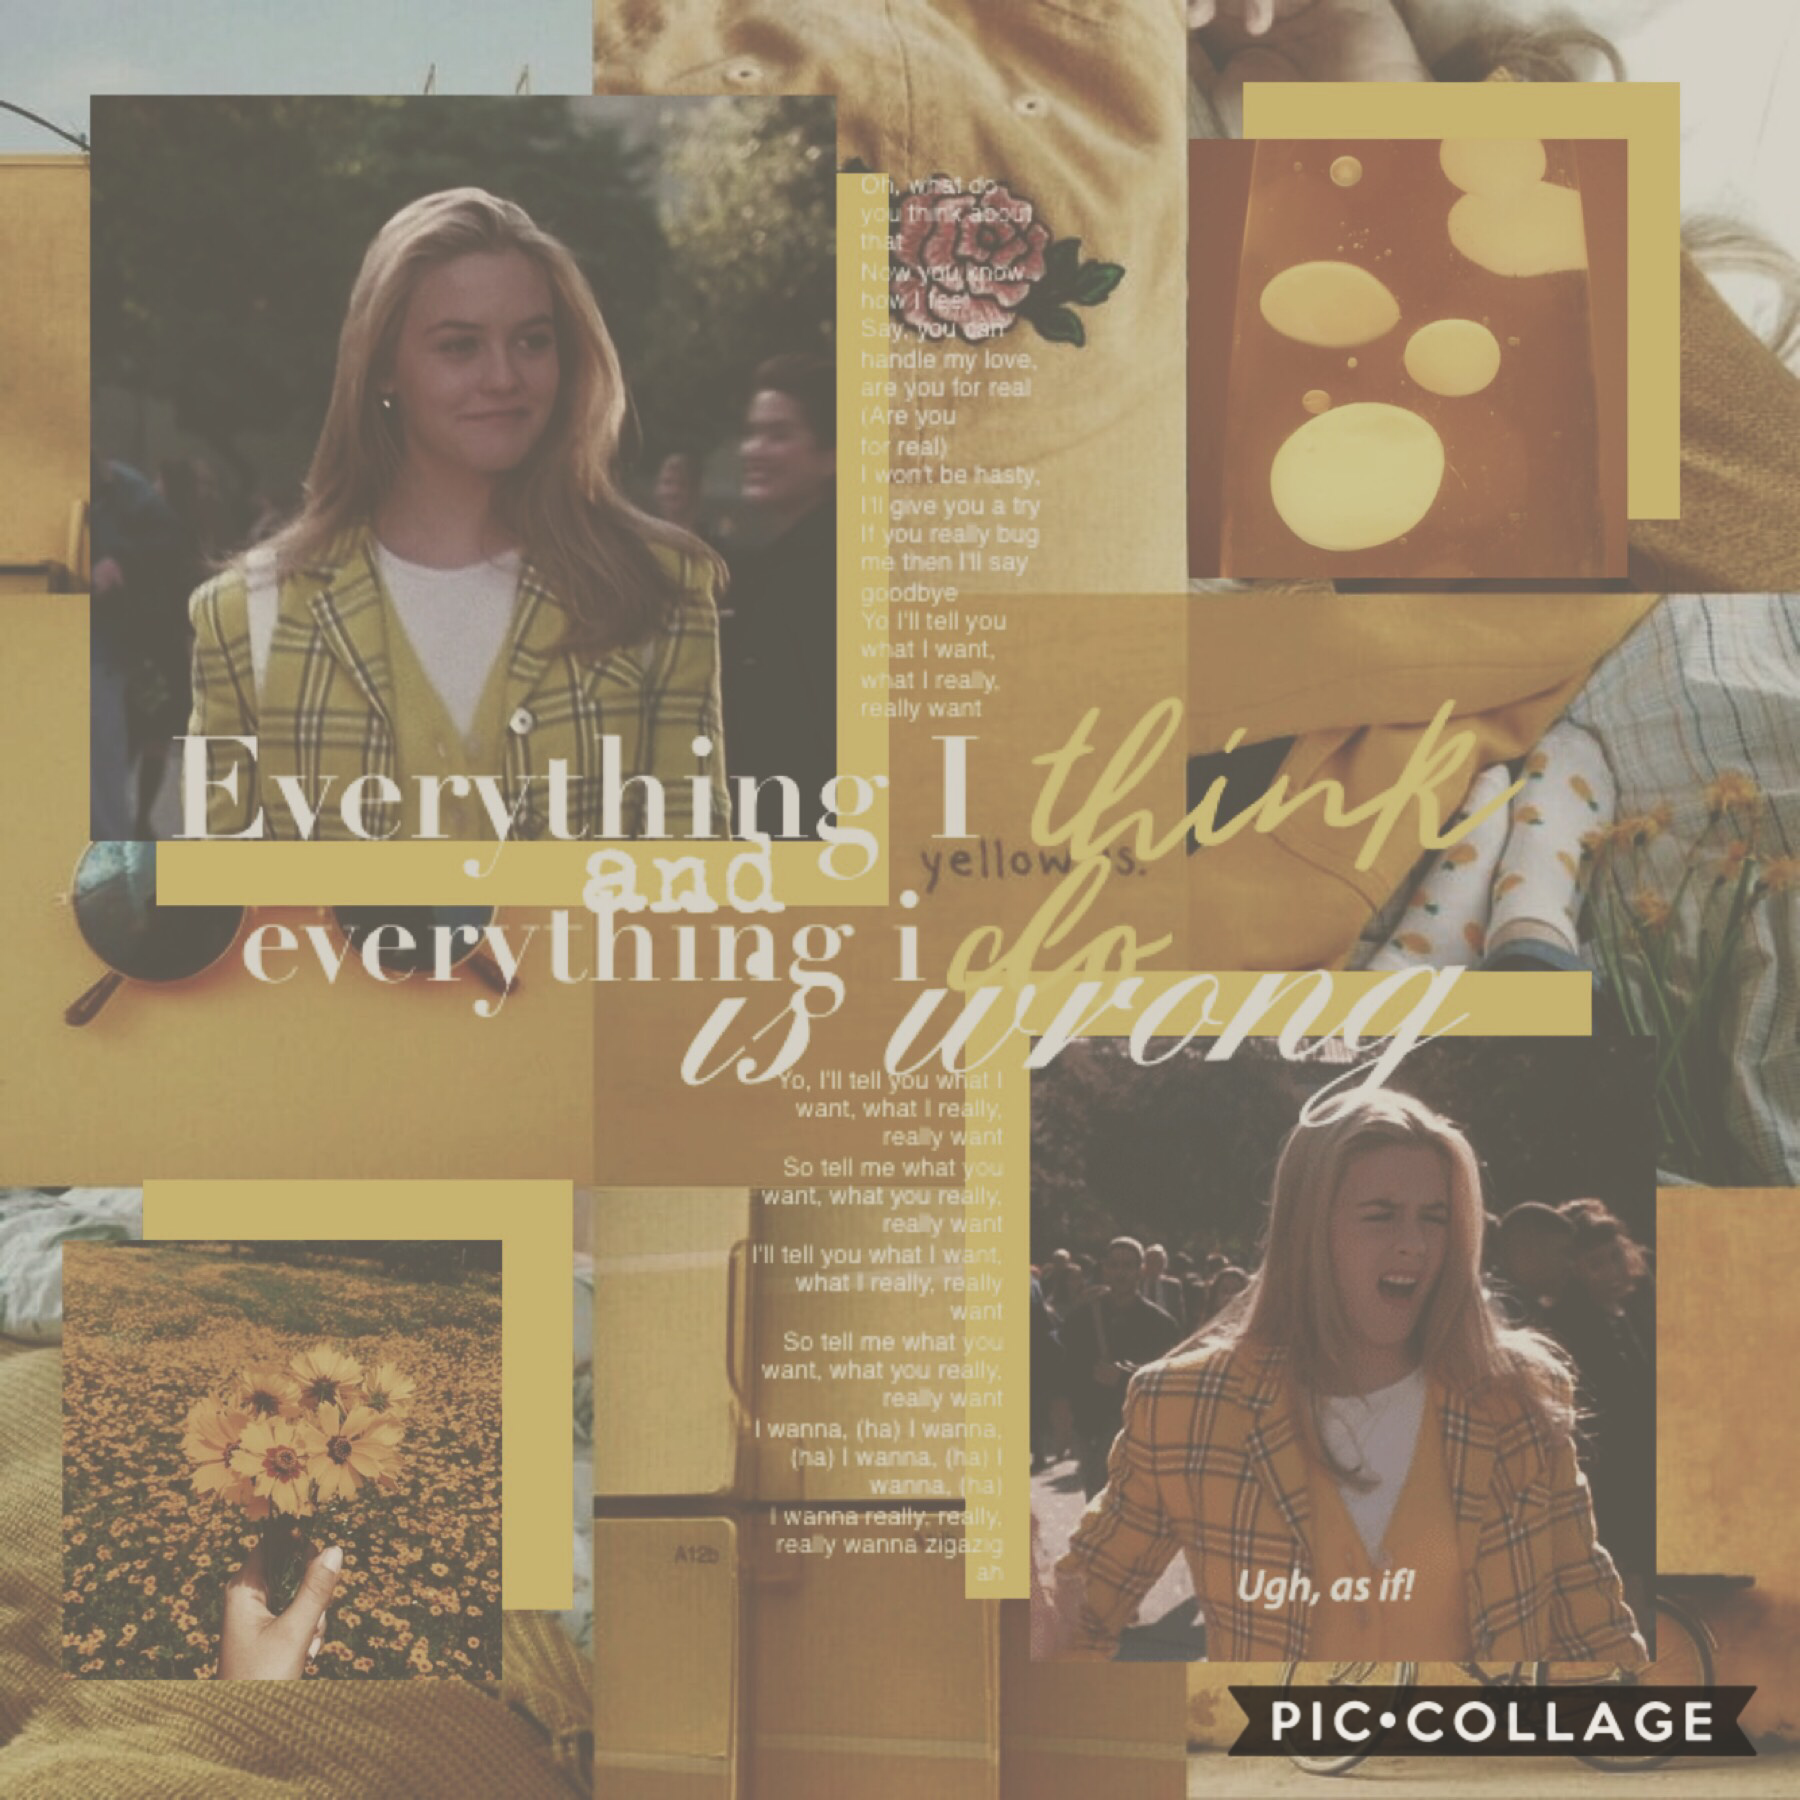 💛TAP💛
Clueless’ Cher! She is so gorgeous and one of the queen of the 90s. Again inspired by @-THIEVES- I’ve been lacking inspired anyone got any ideas? 
———
Lyrics- Wannabe by Spice Girls